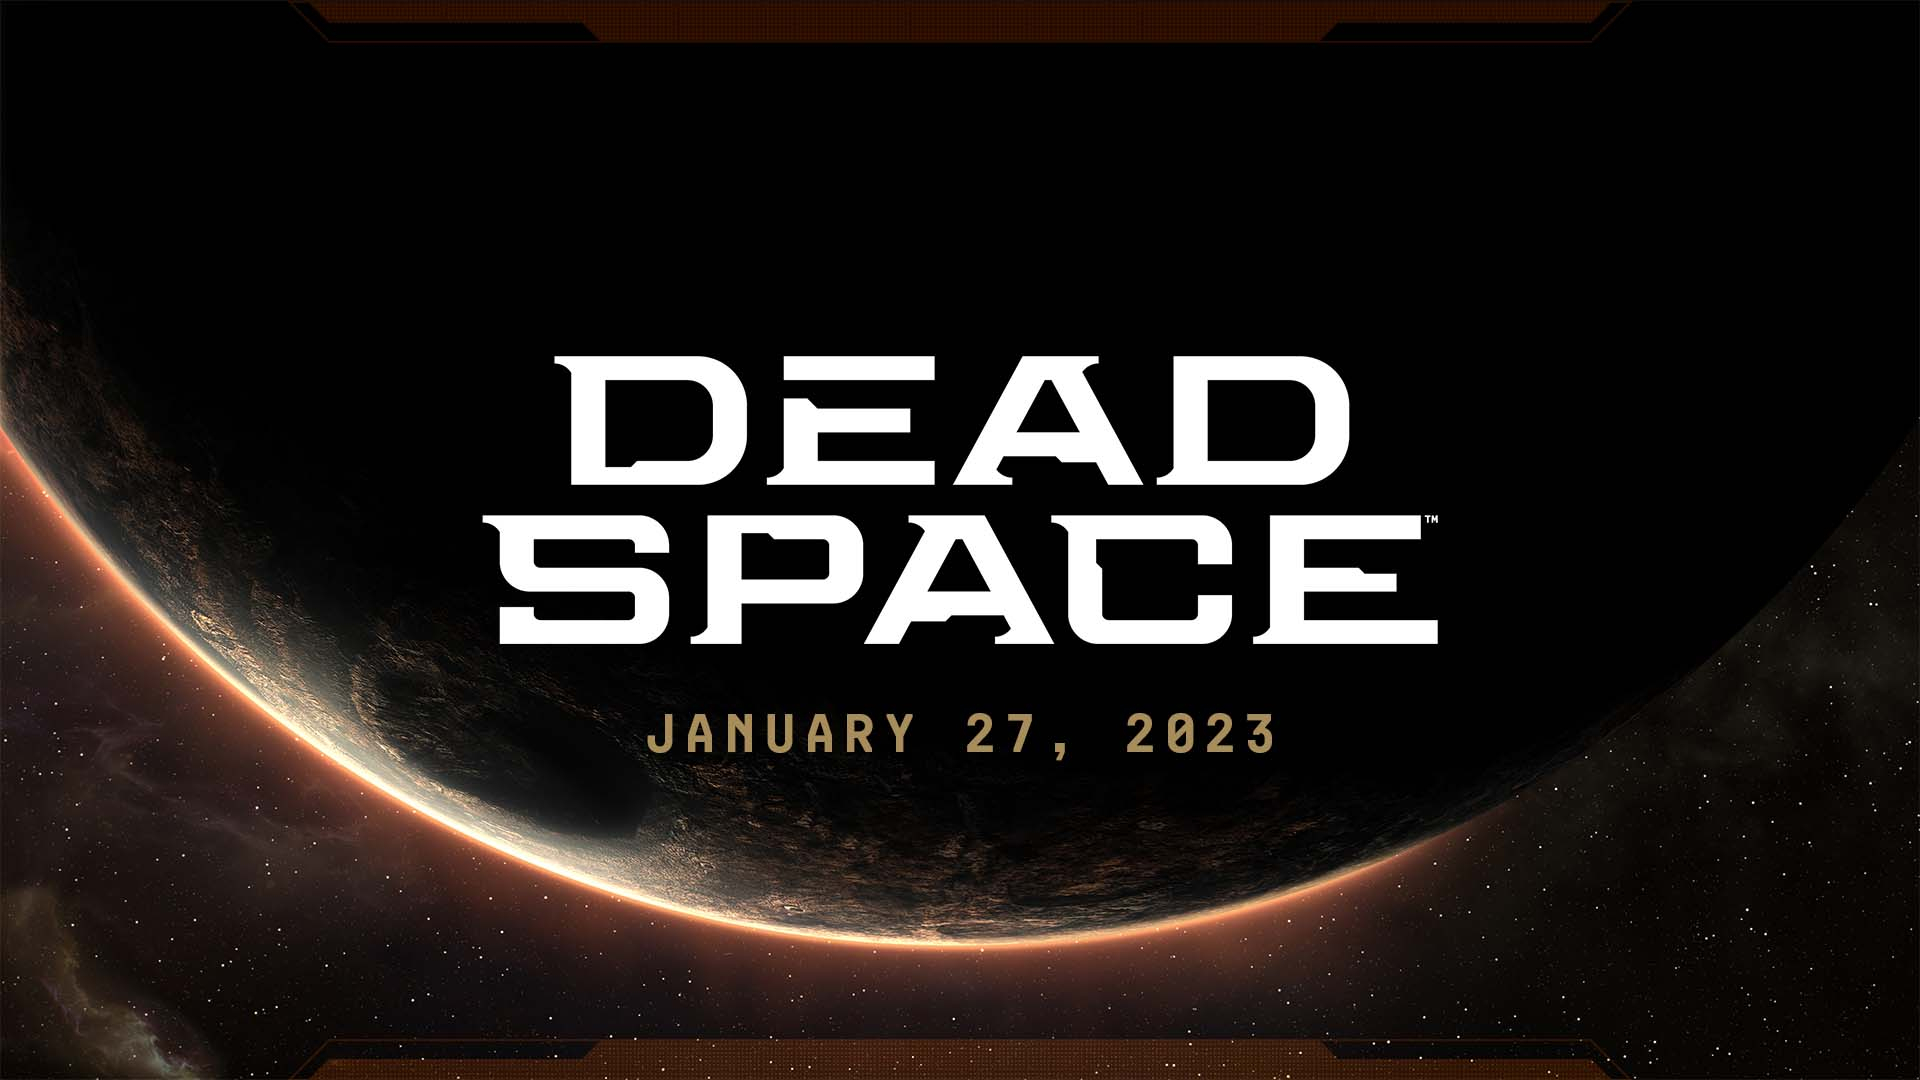     Dead Space          27 